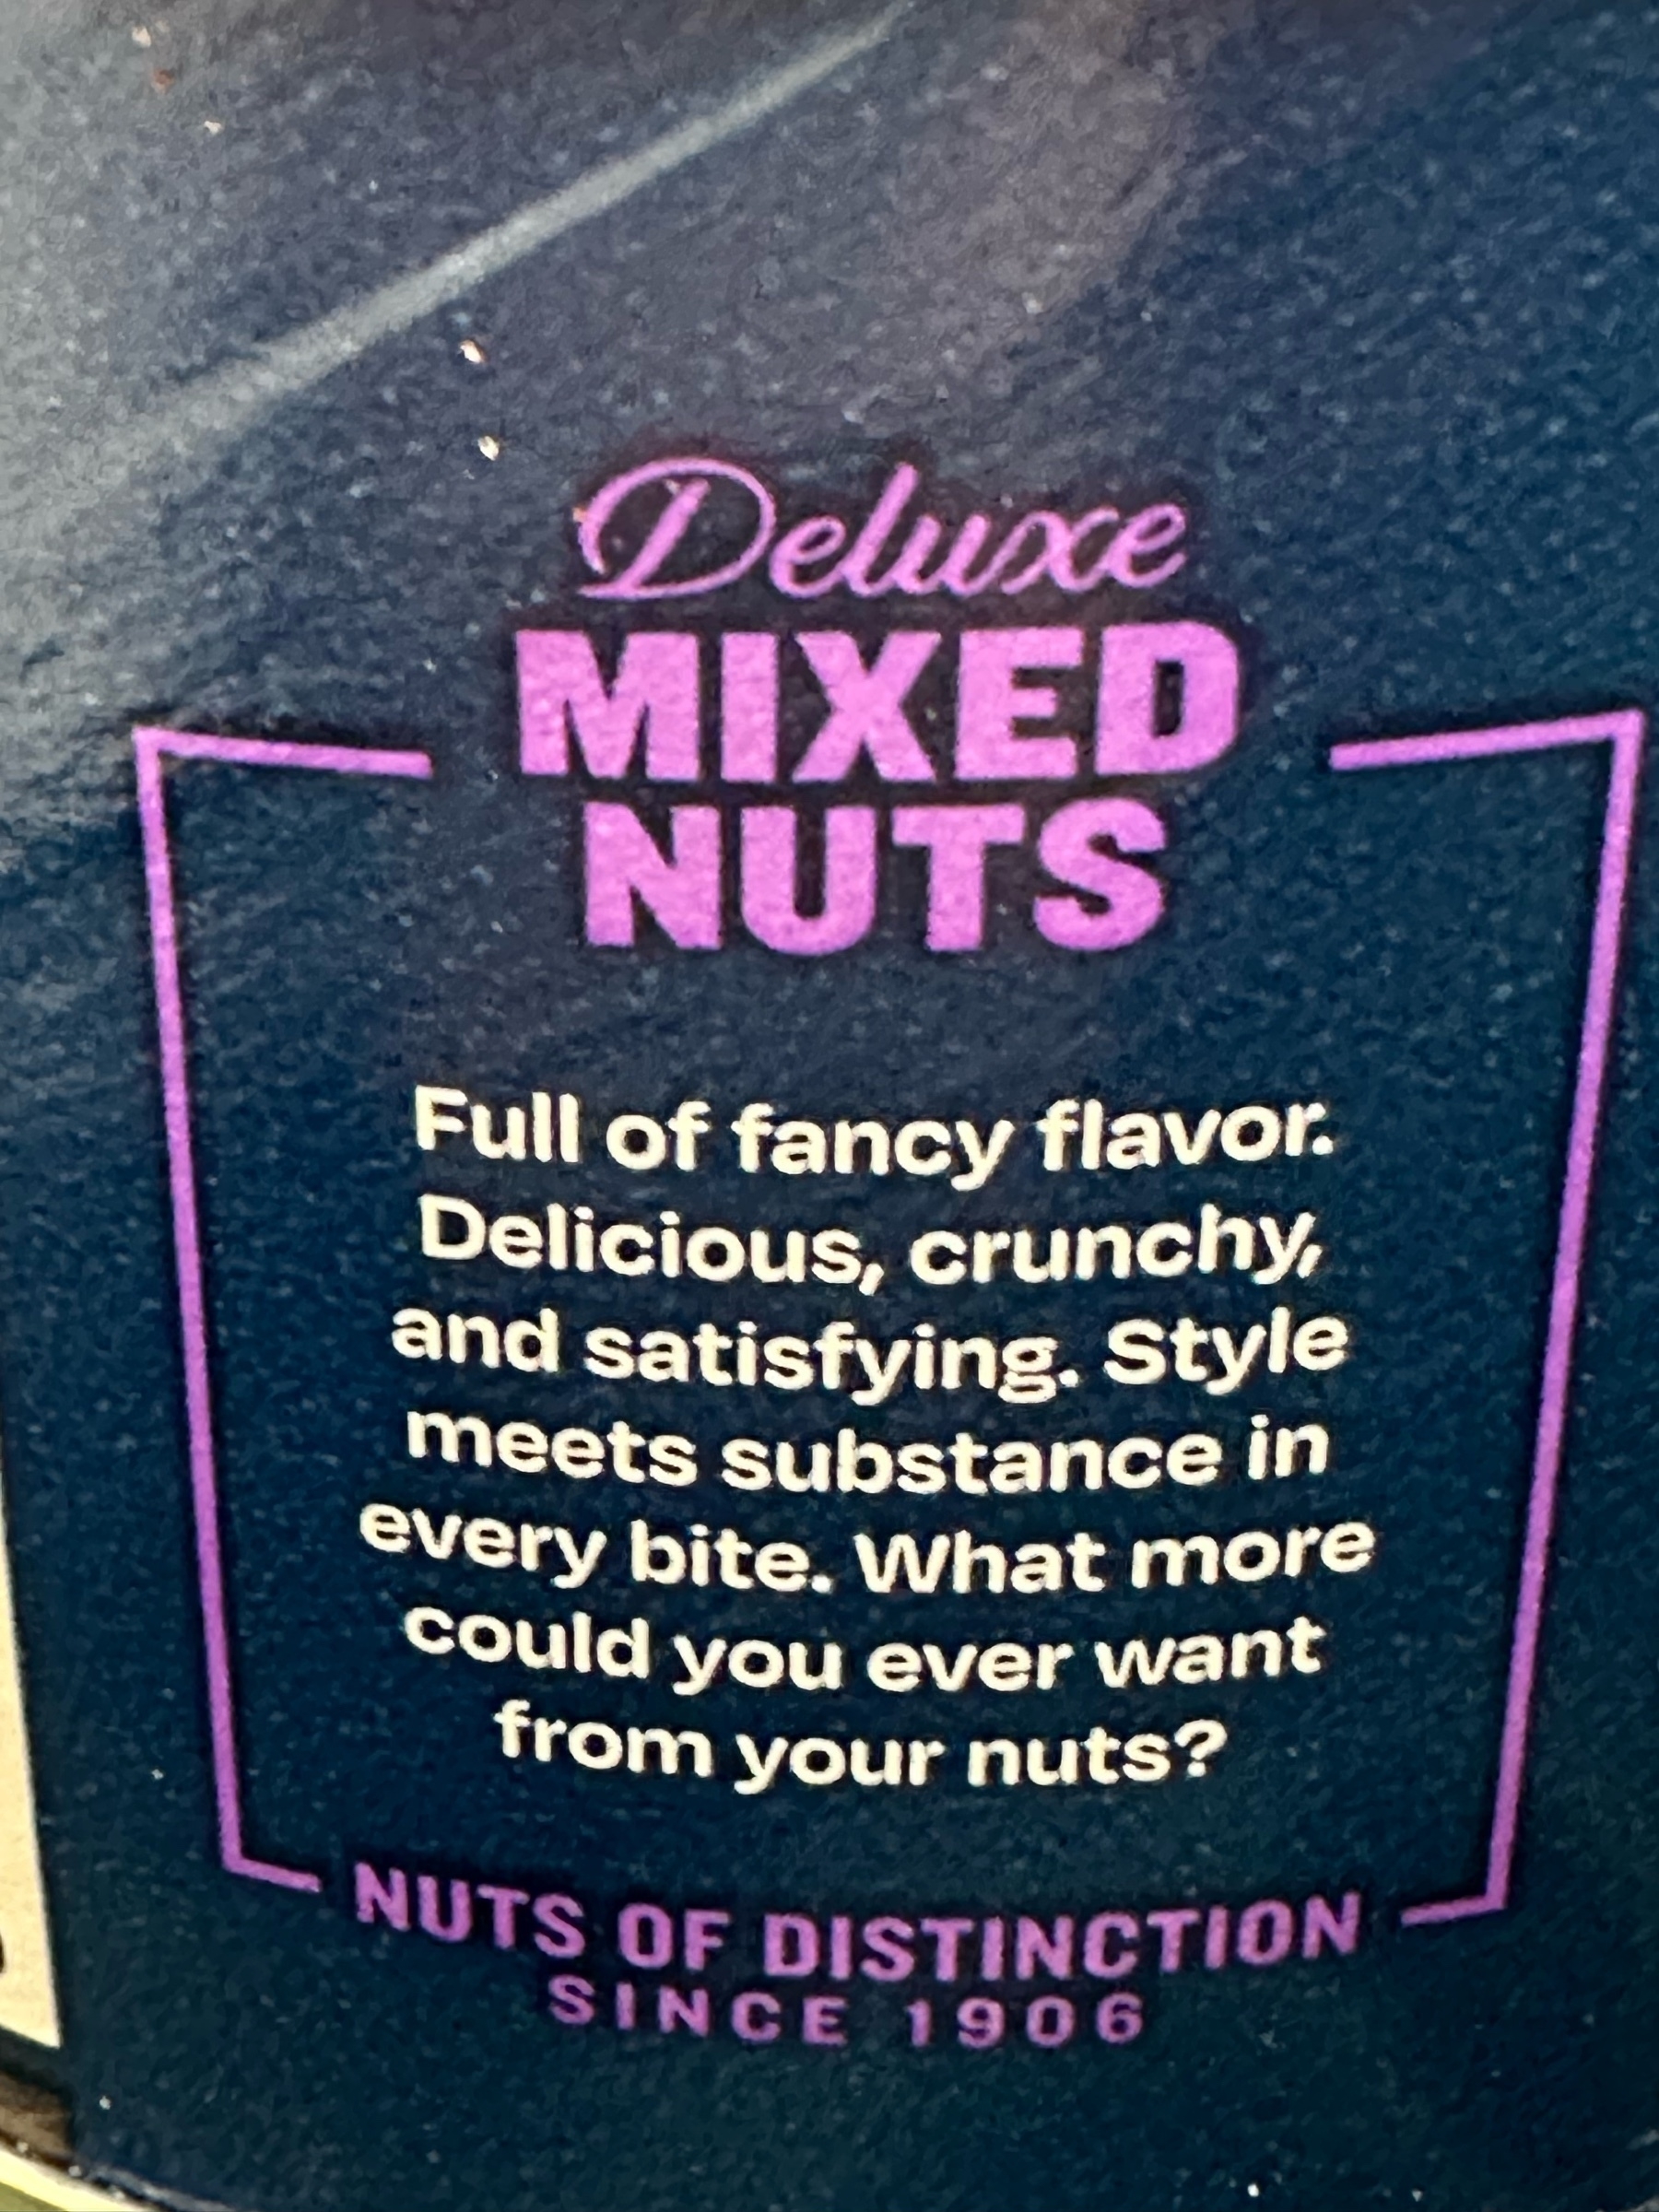 "full of fabcy flavor" nuts badging. 